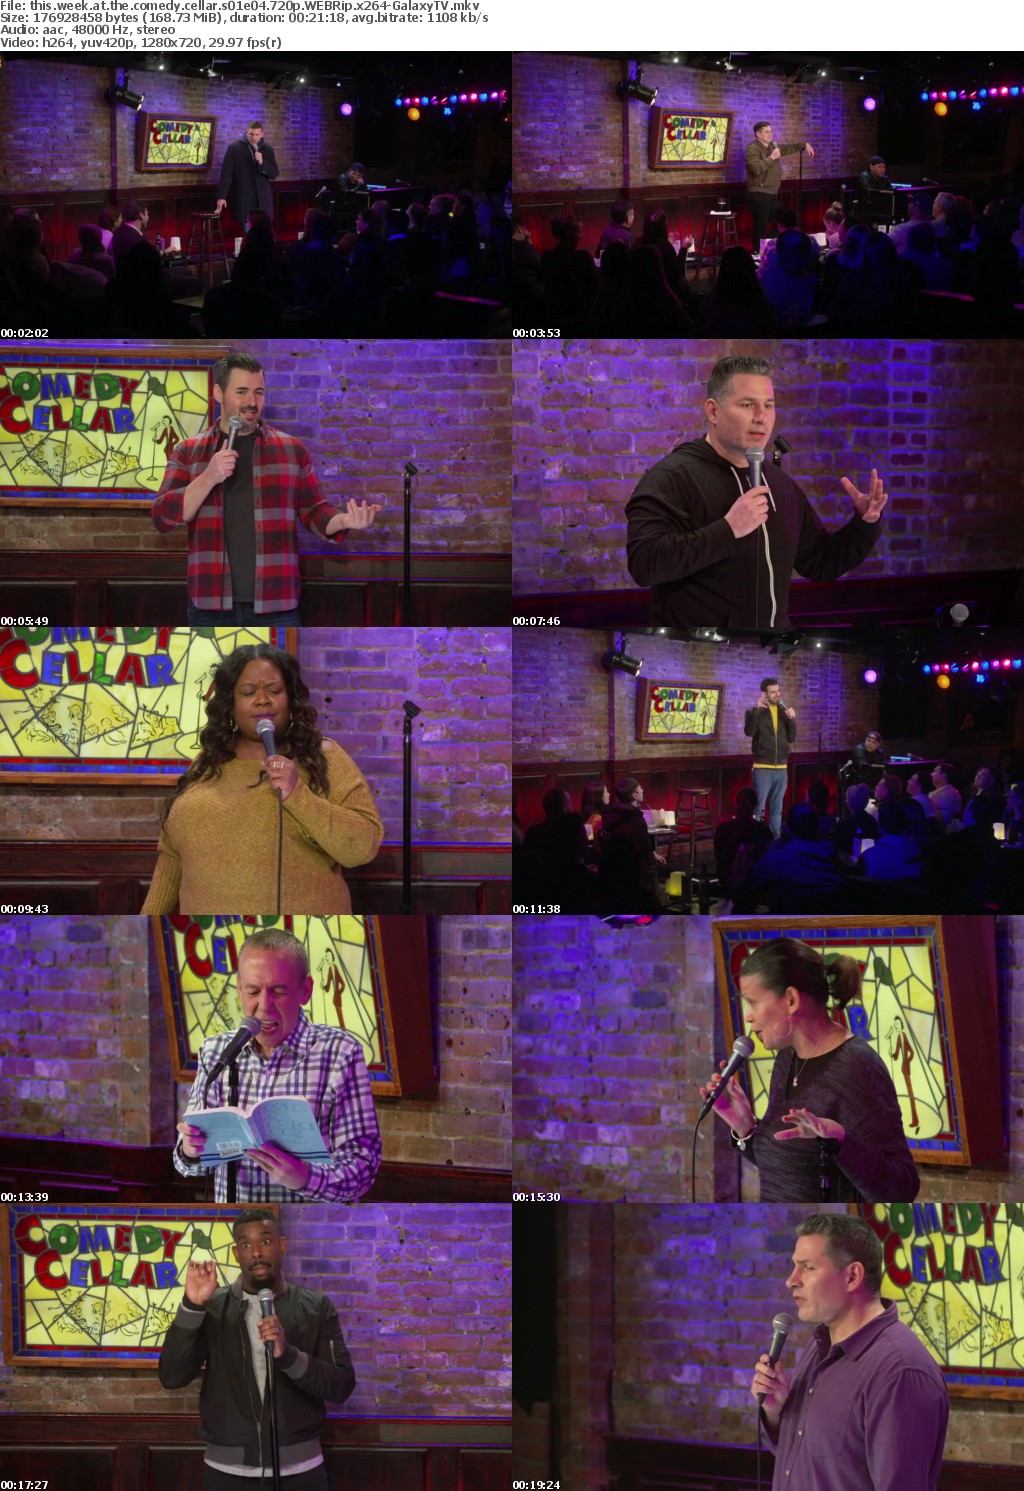 This Week at the Comedy Cellar S01 COMPLETE 720p WEBRip x264-GalaxyTV